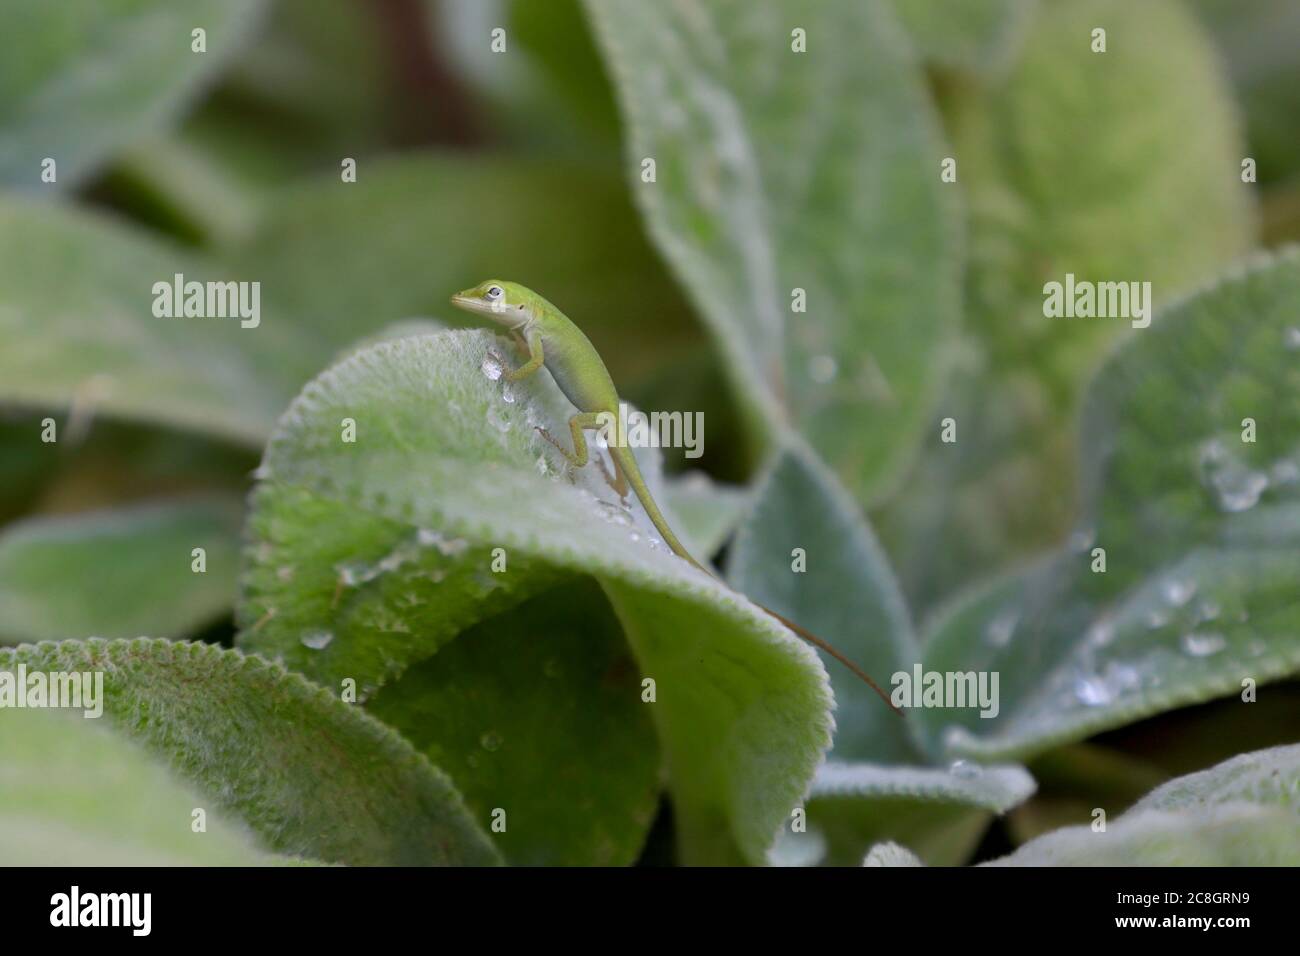 Green anole lizard on lamb's ear leaf with water droplets Stock Photo